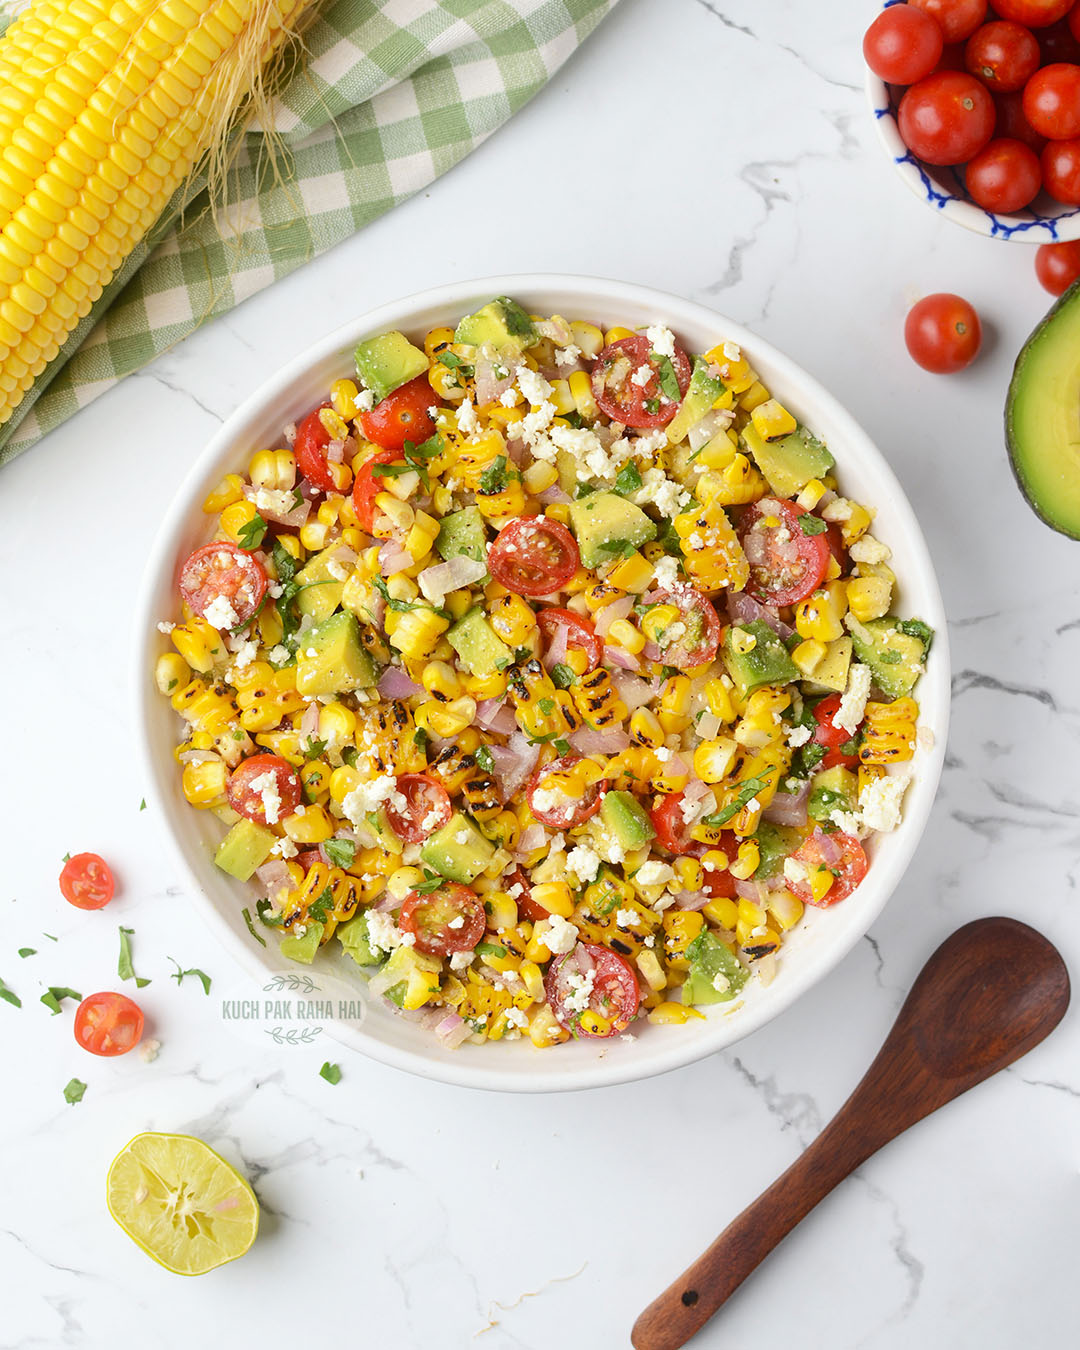 Grilled corn kernel salad recipe with avocados tomatoes and red onions.